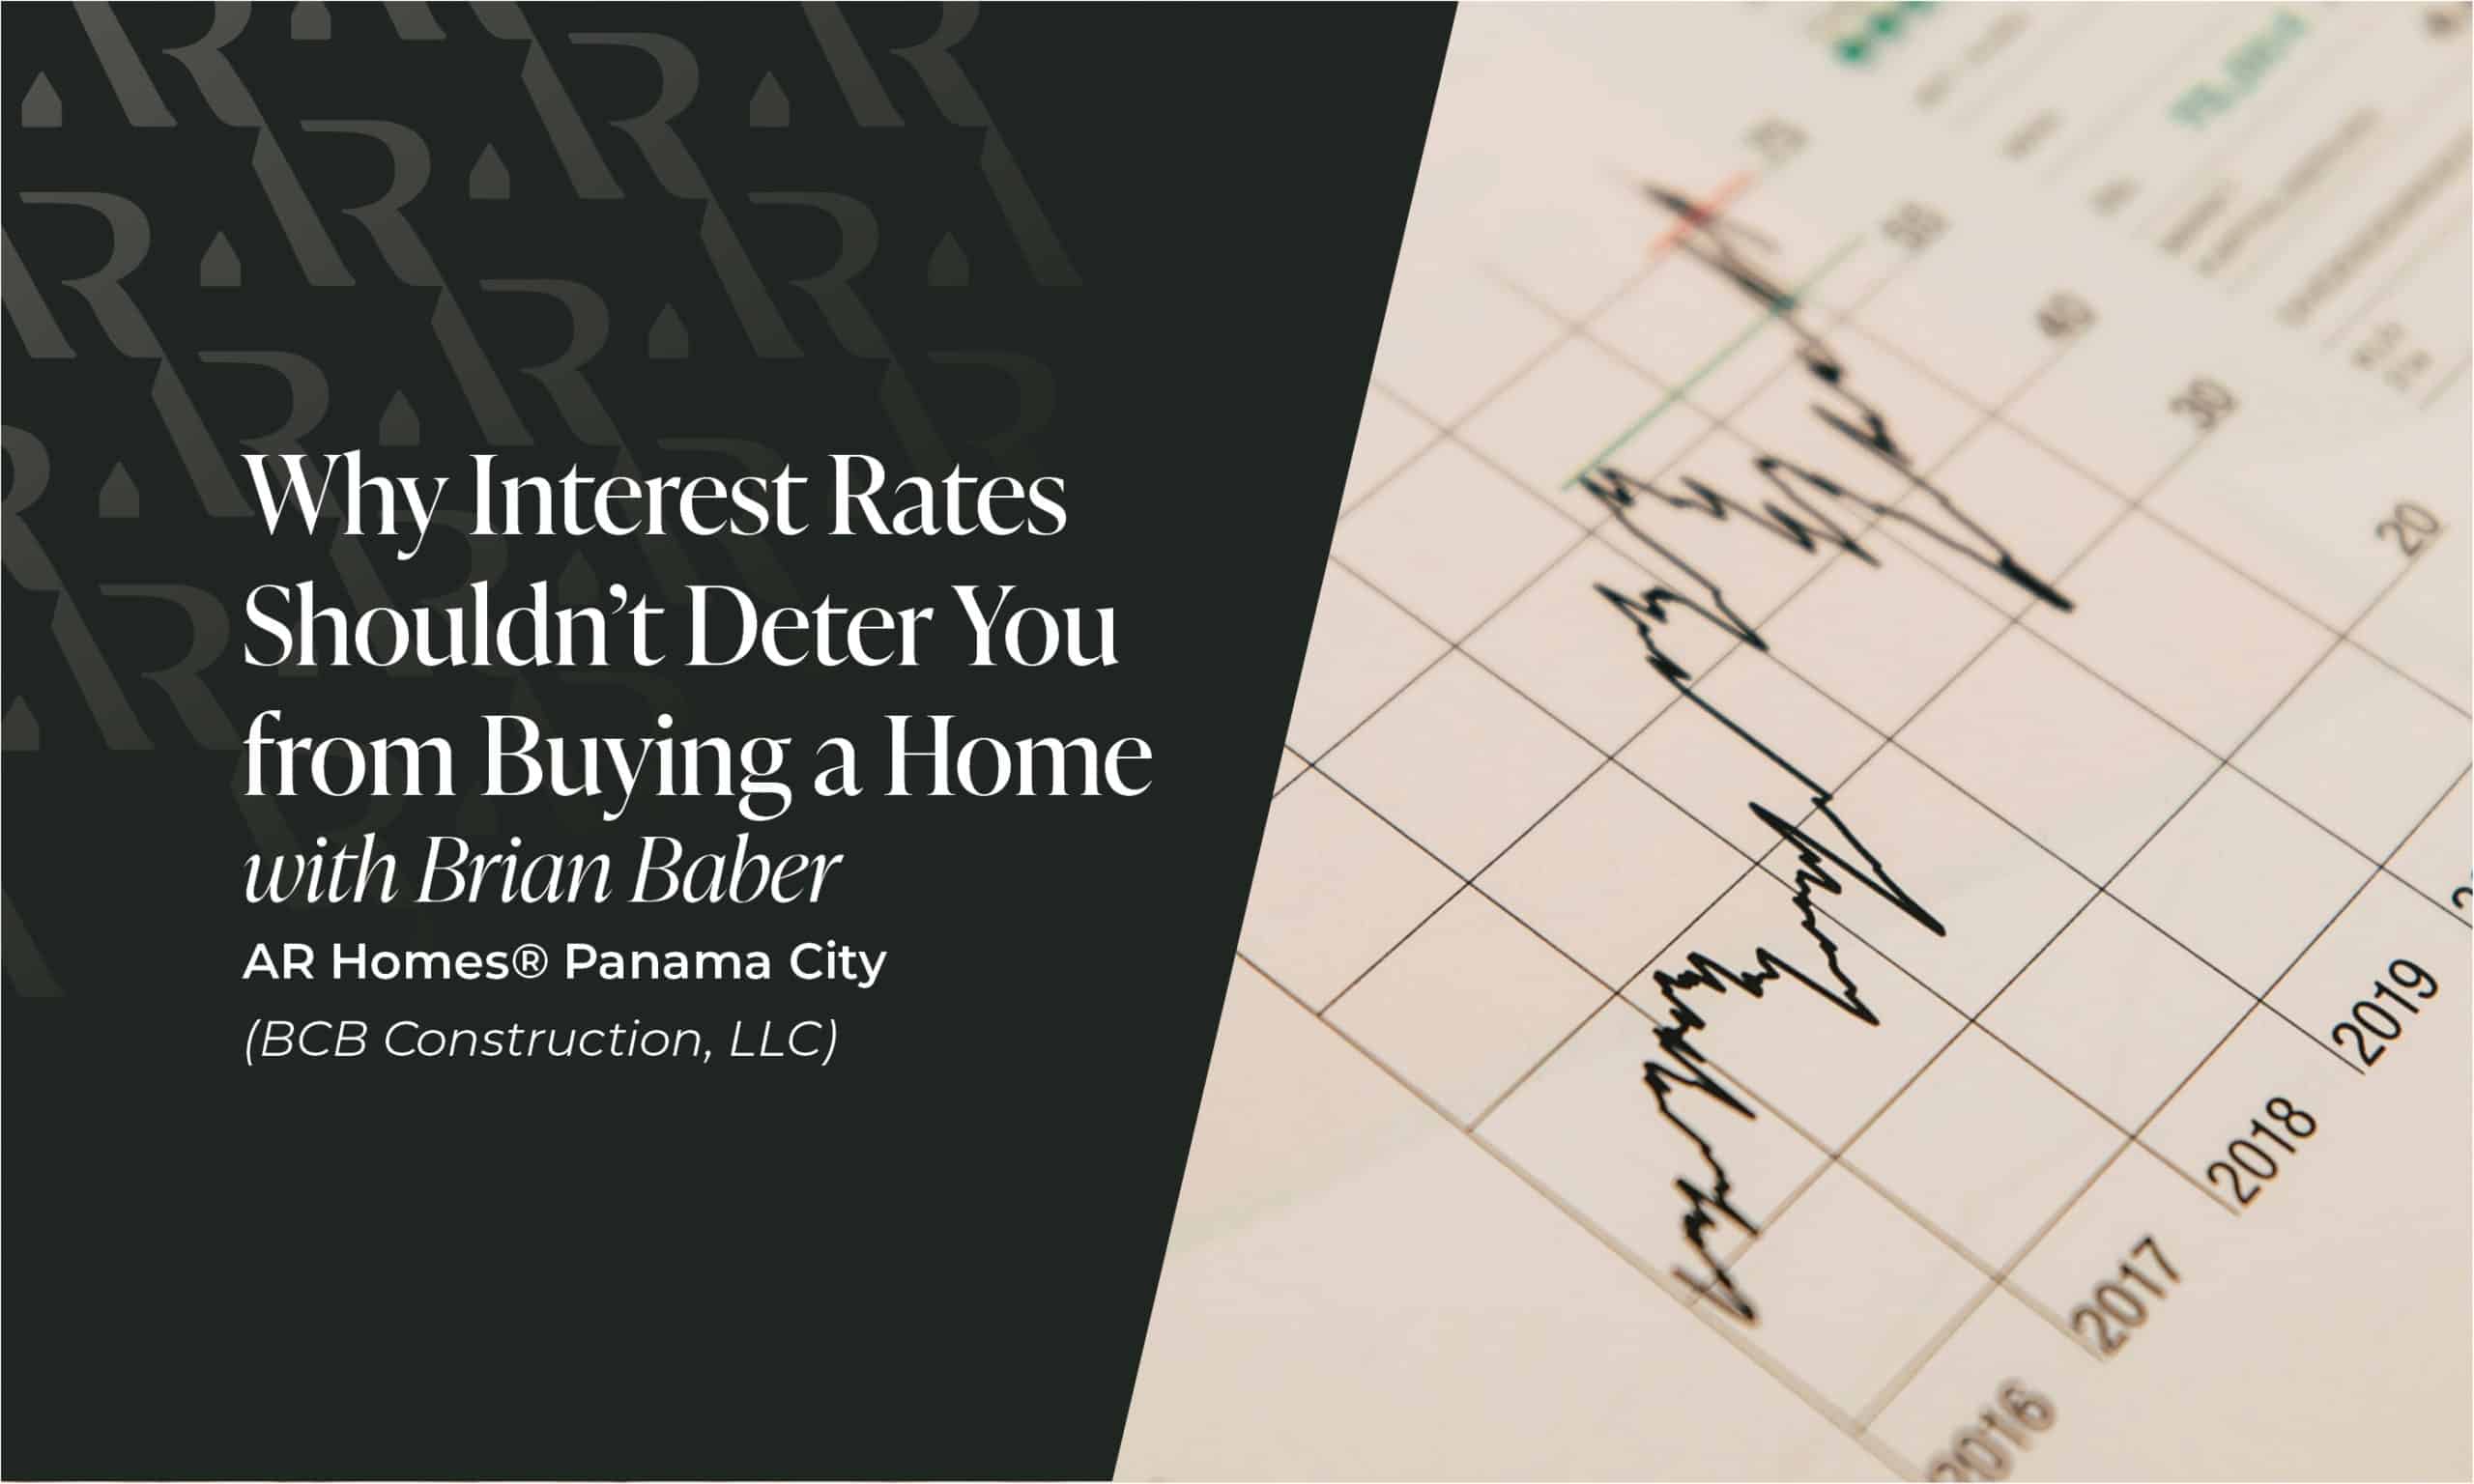 Why Interest Rates Shouldn't Deter You From Buying A Home | AR Homes® Panama City